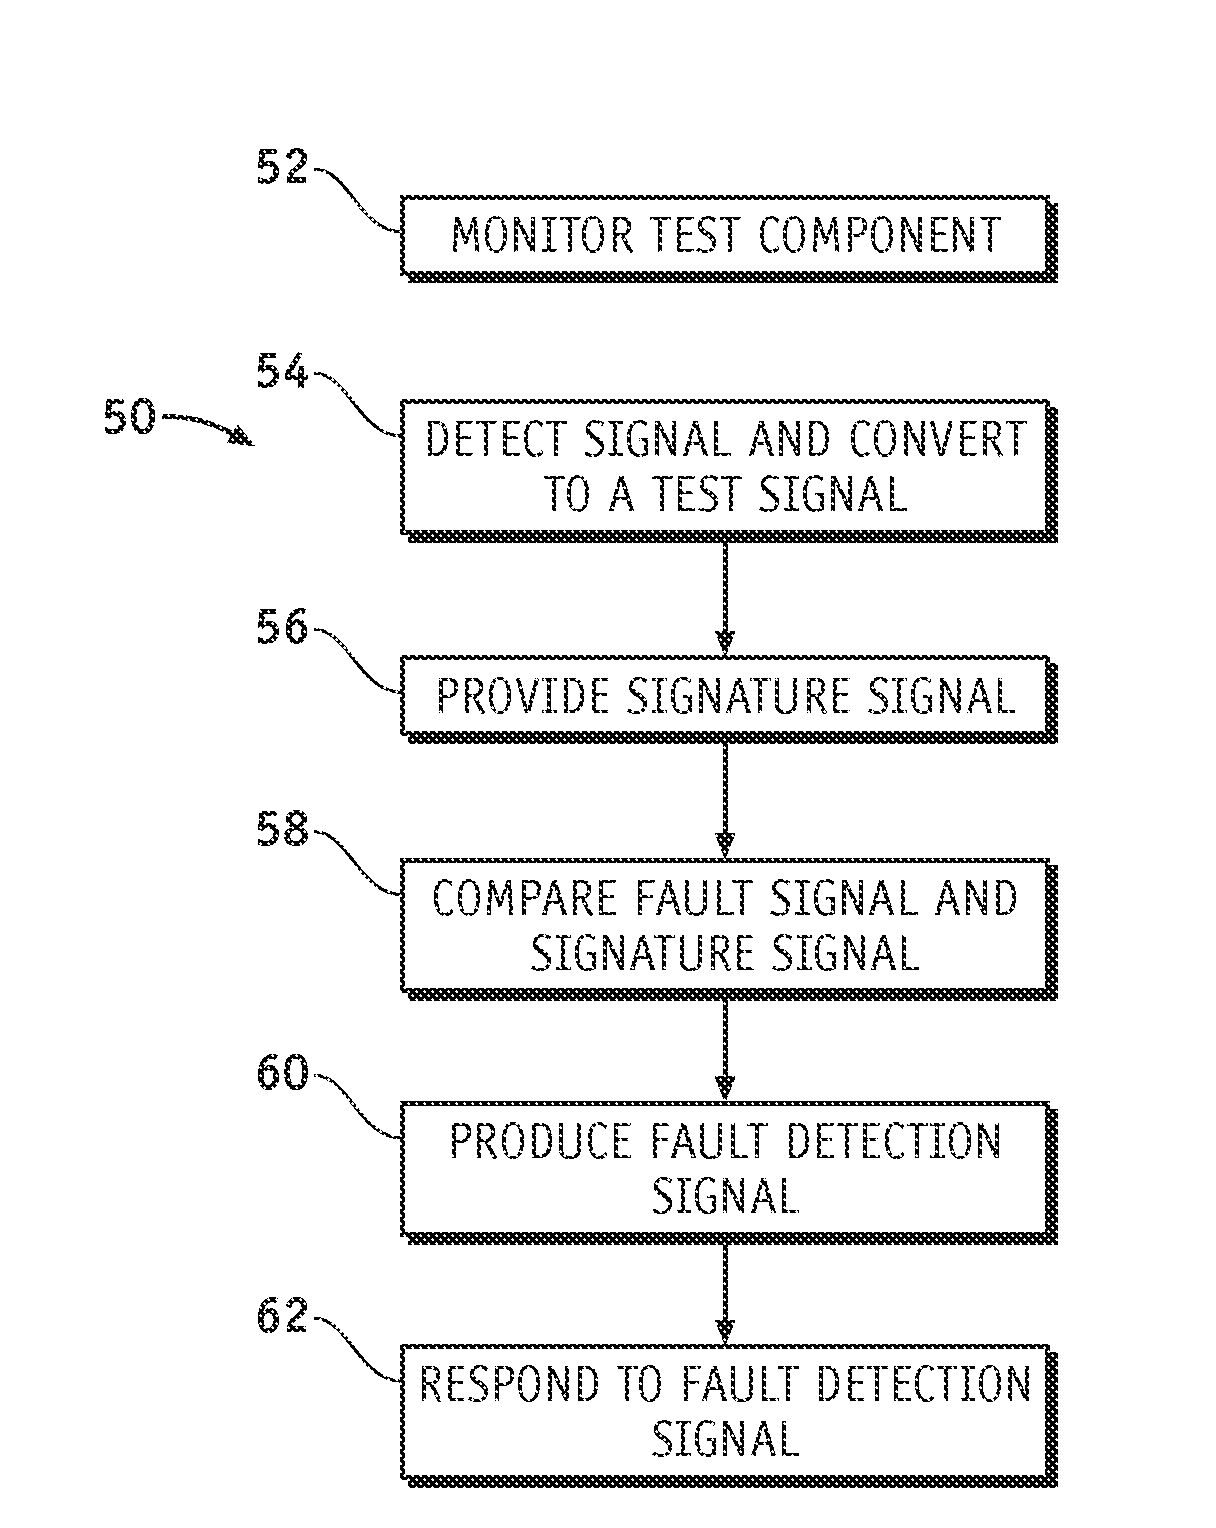 Fault detection apparatuses and methods for fault detection of semiconductor processing tools